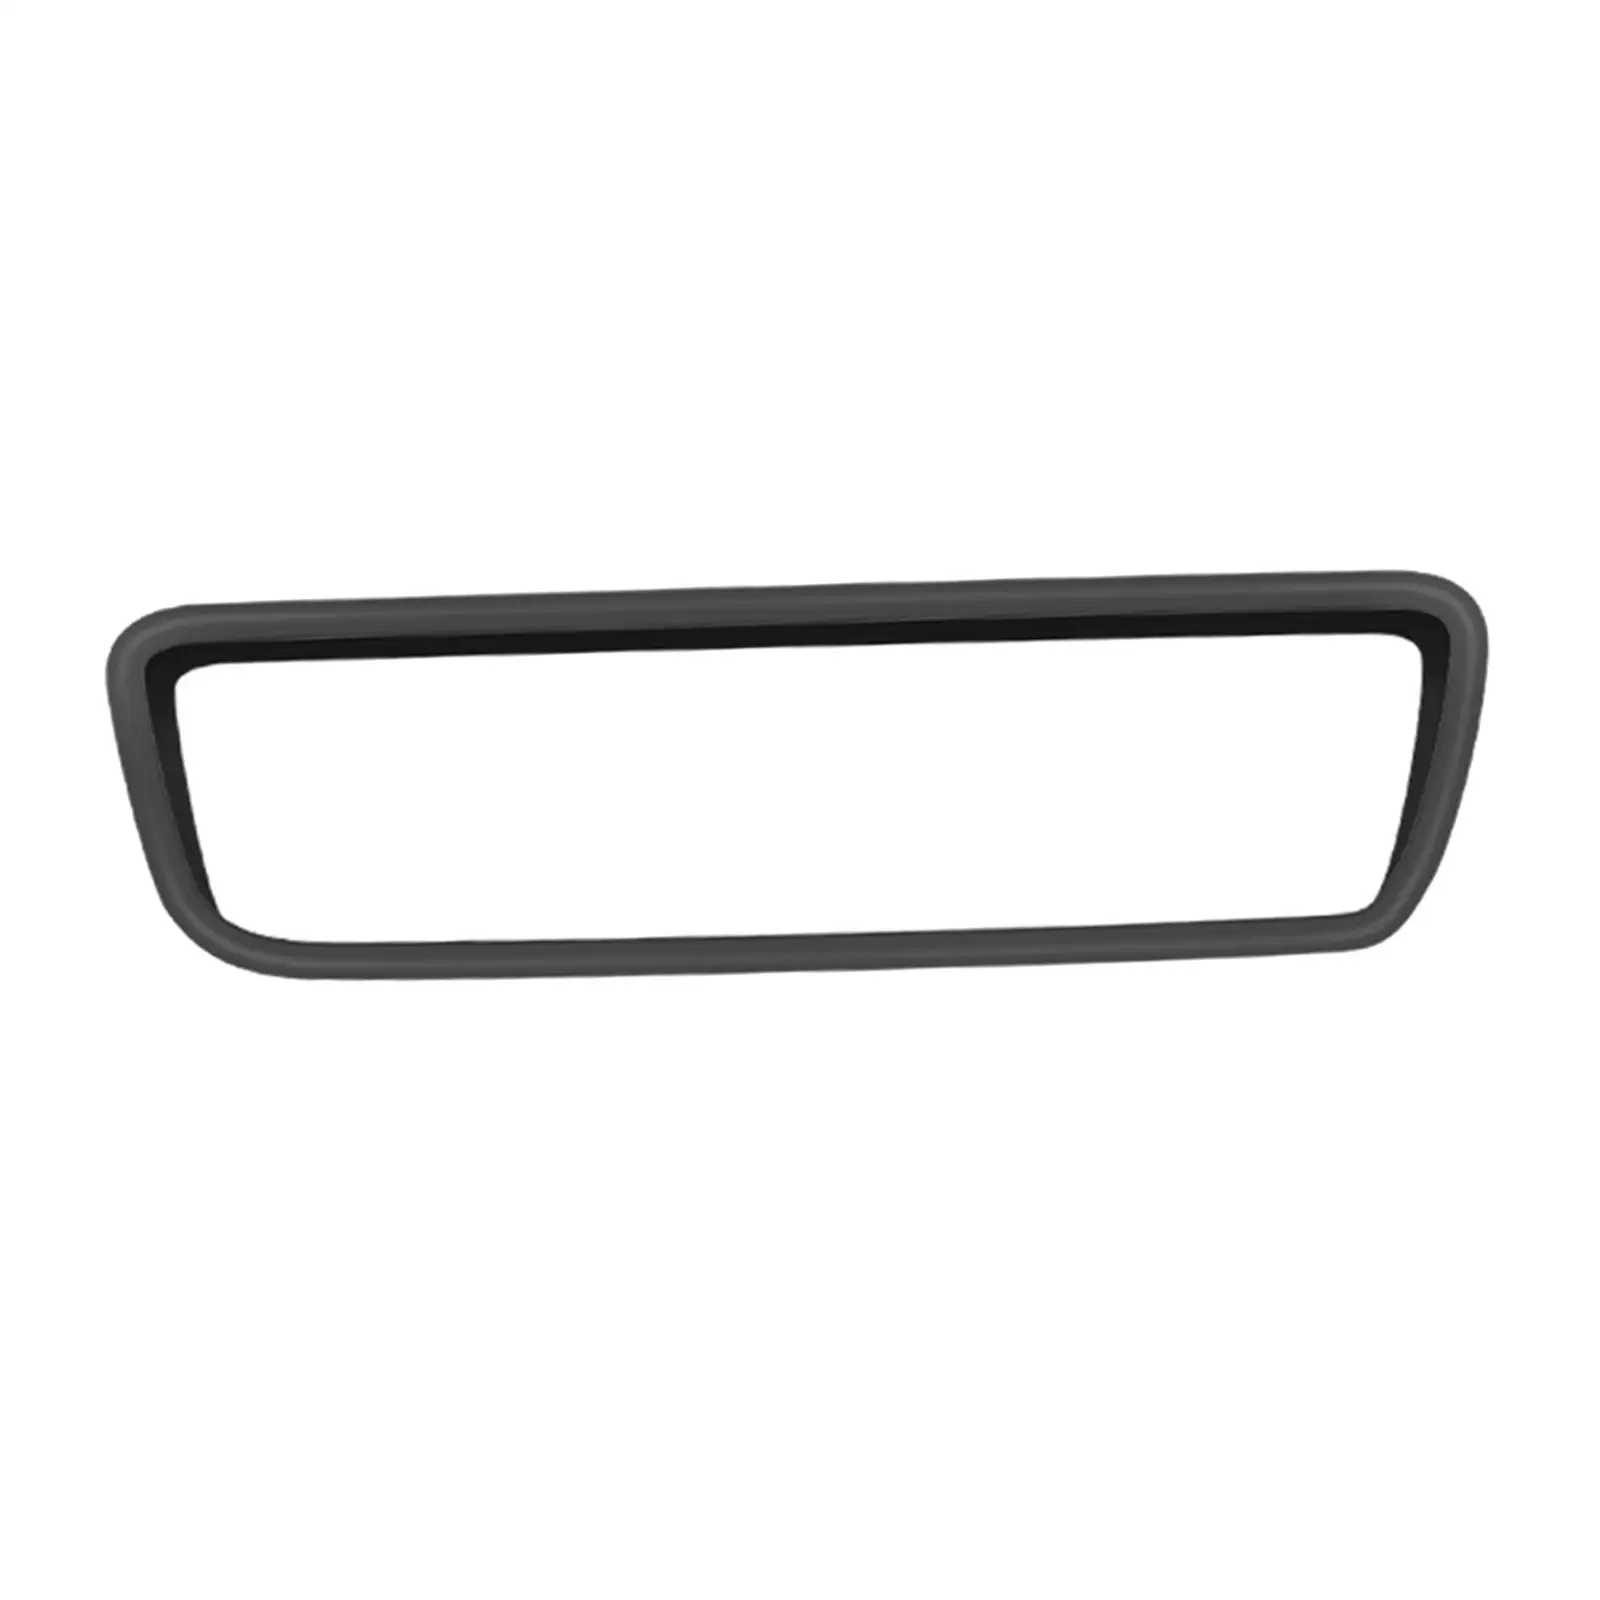 Rearview Mirror Cover Replaces Spare Parts Silicone for Tesla Model 3/Y